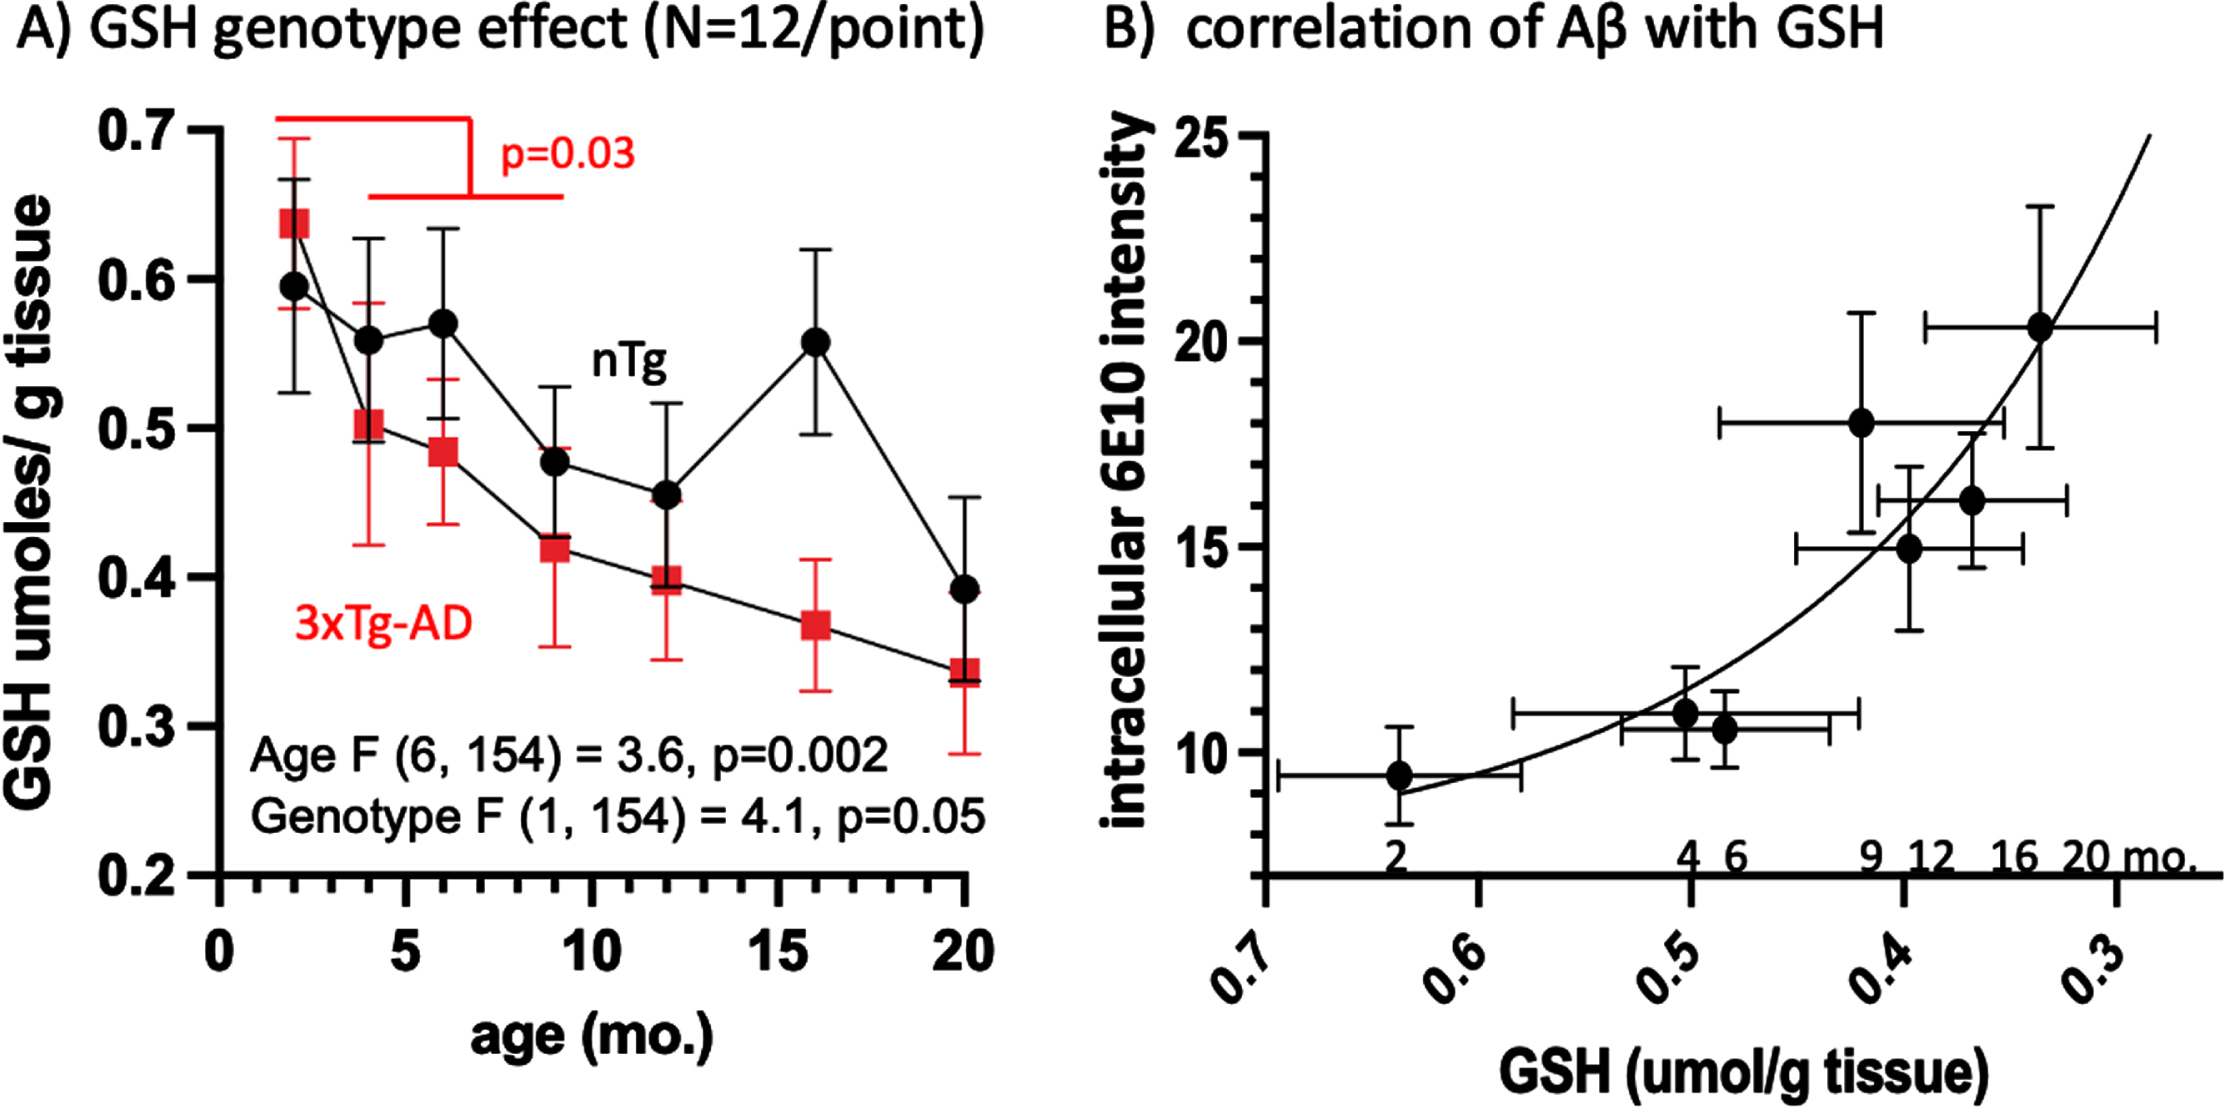 GSH declines early at 4 months and correlates with the rise in 6E10 Aβ. A) Brain GSH levels decline with age in 3xTg-AD faster than in nTg, with an early accelerated drop from 2 to 4 months (t-test of 2 months versus 4, 6, and 9 months, p = 0.03). B) Correlation of 3xTg-AD intracellular CA1 6E10 rises exponentially with a decline in GSH (reverse scale) (6E10 = 113*exp(-6.5*GSH) + 7.2, R2 = 0.83. Numbers indicate age of animals.